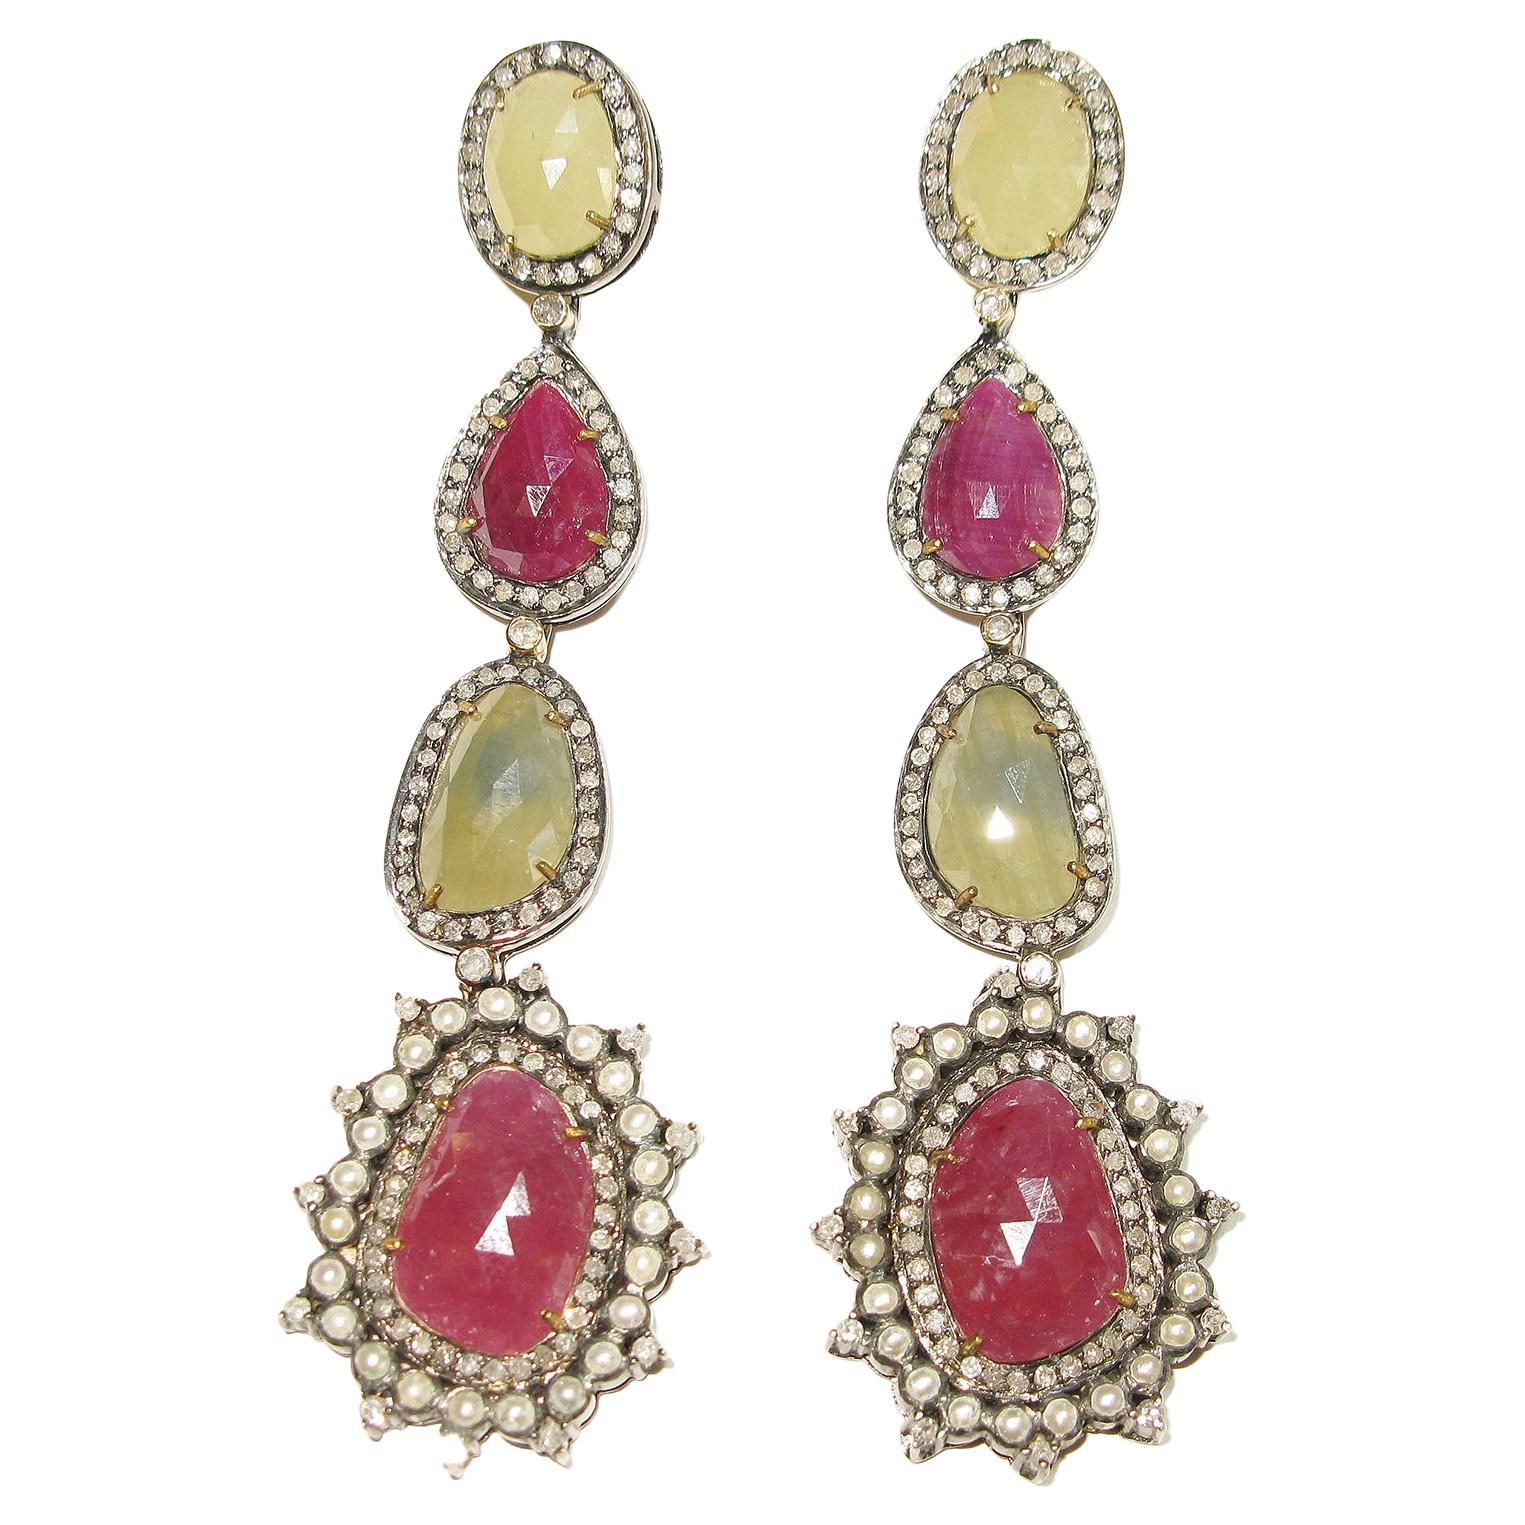 Multi Shaped Gemstone Earrings with Pave Diamonds Made in 18k Gold & Silver